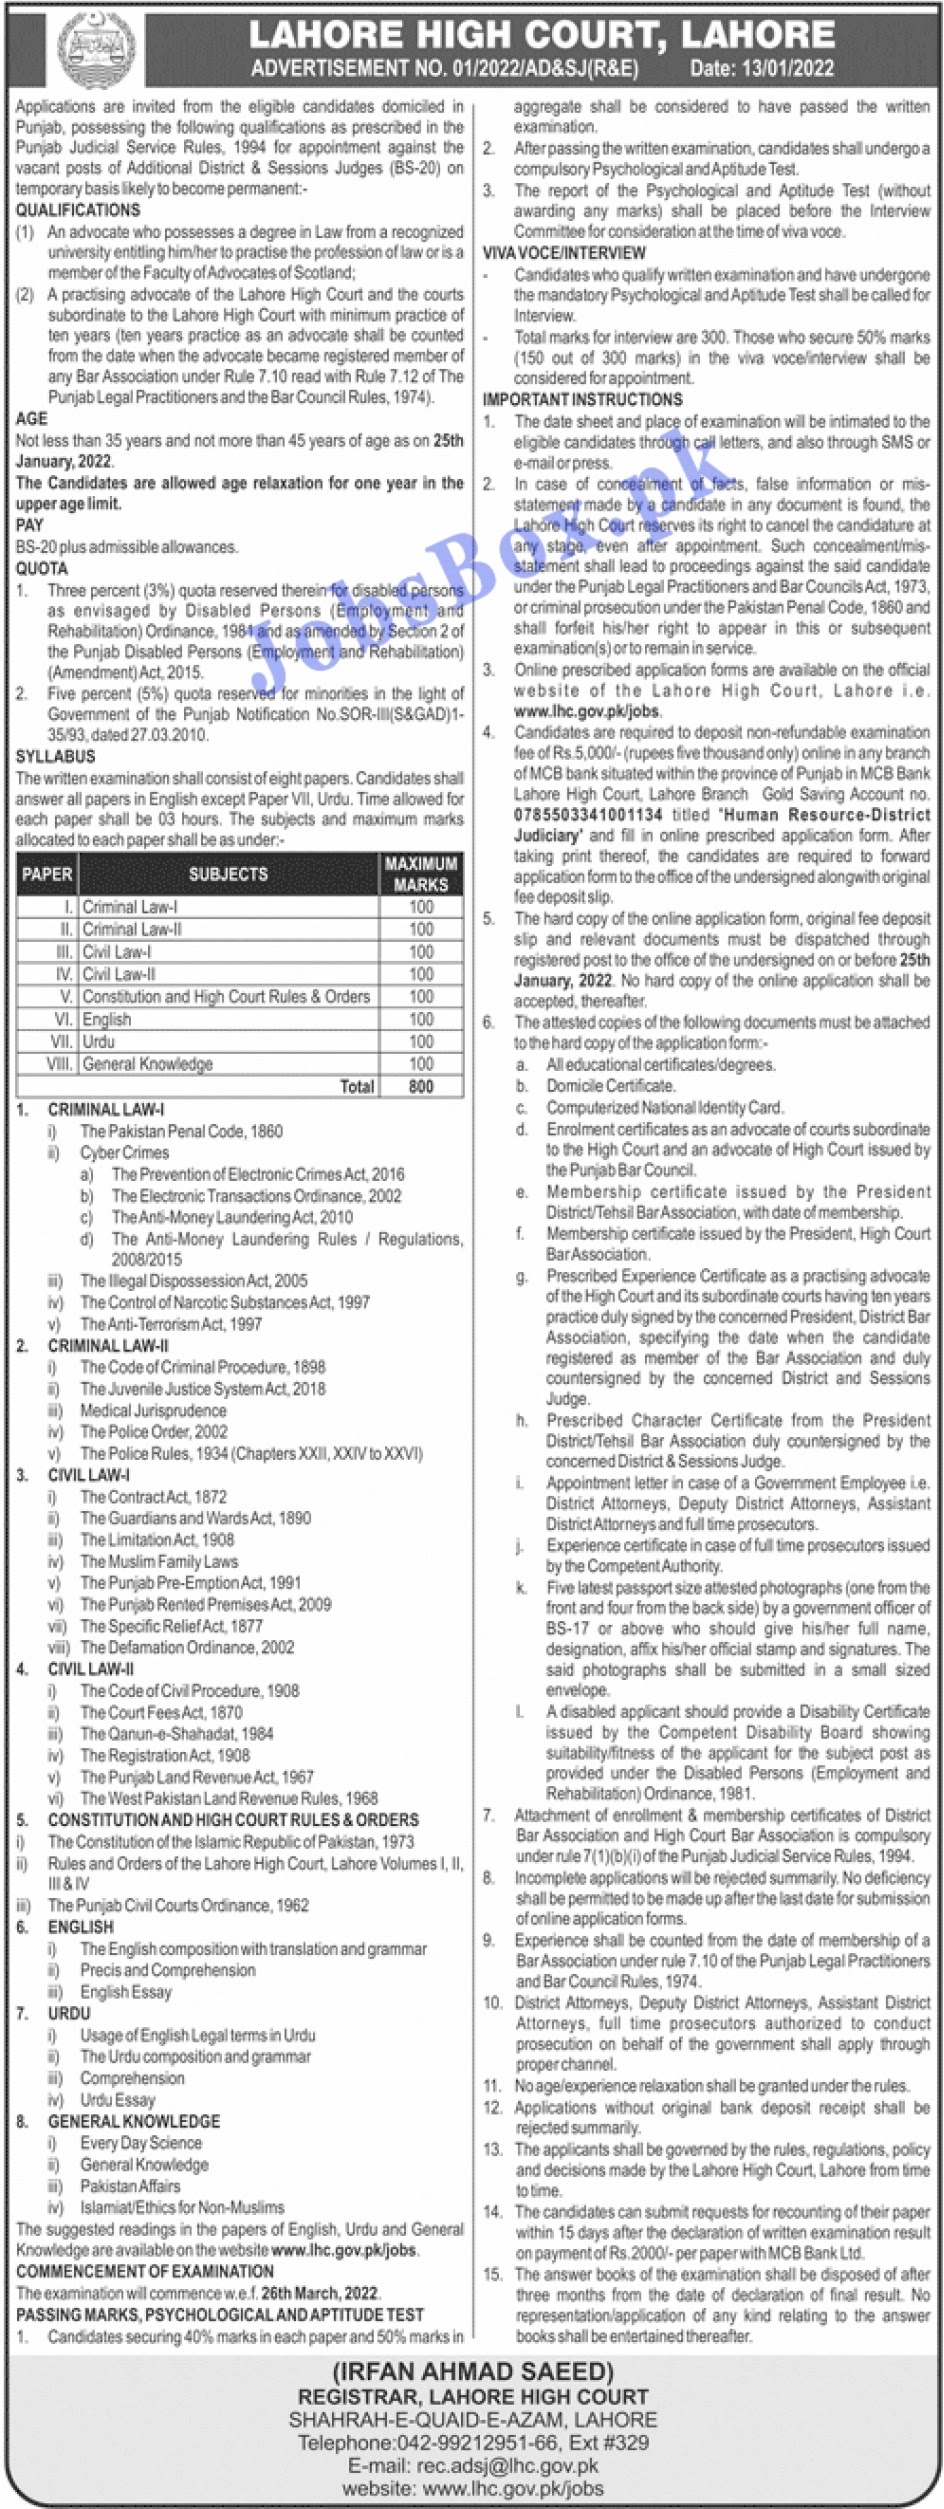 Lahore High Court Jobs 2022 || government jobs in lahore high court 2022